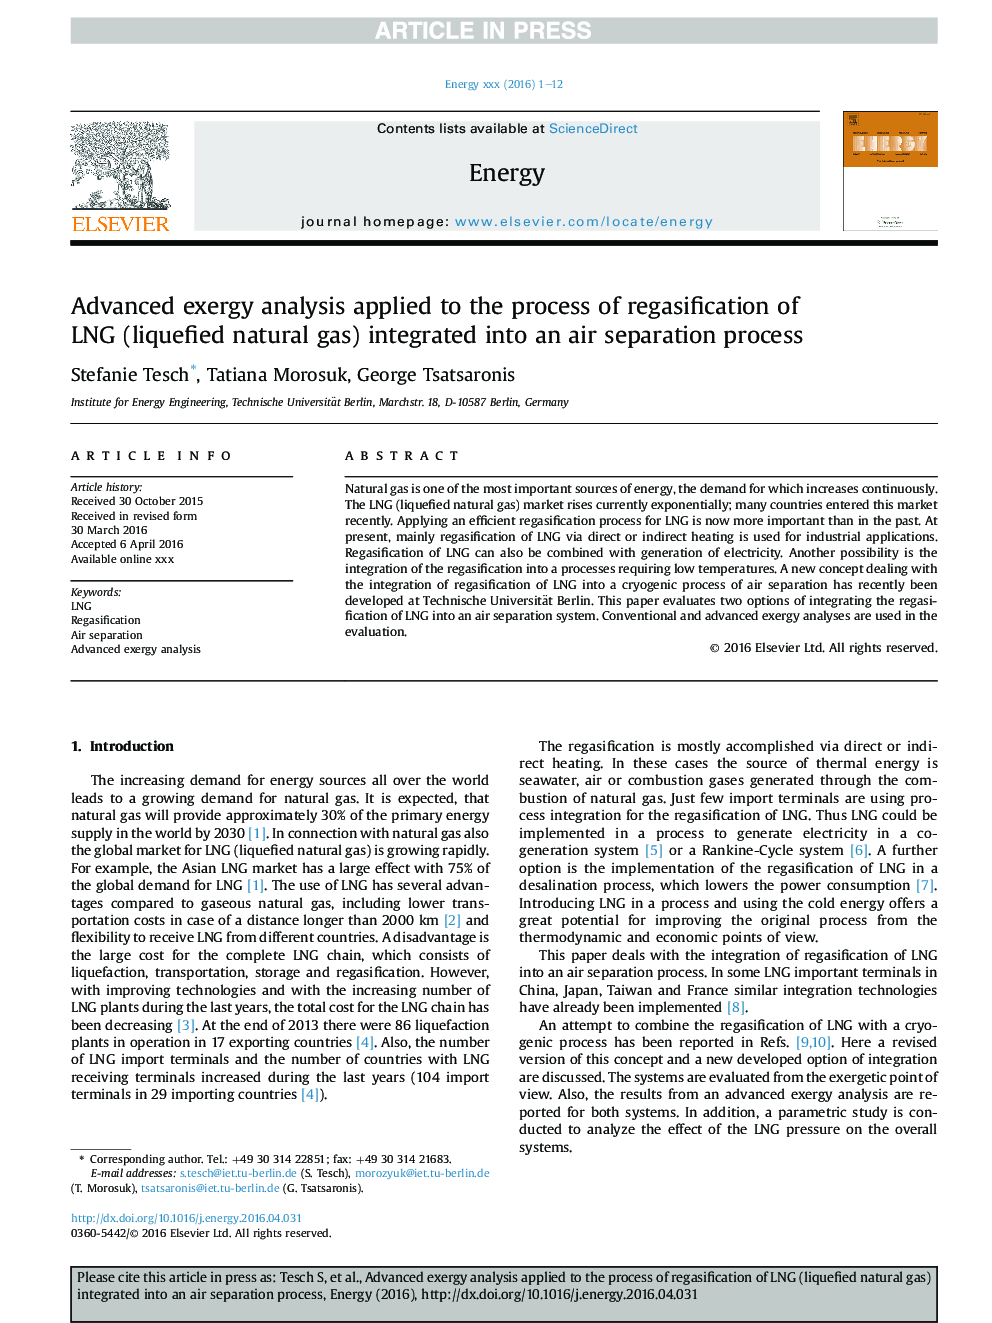 Advanced exergy analysis applied to the process of regasification of LNG (liquefied natural gas) integrated into an air separation process